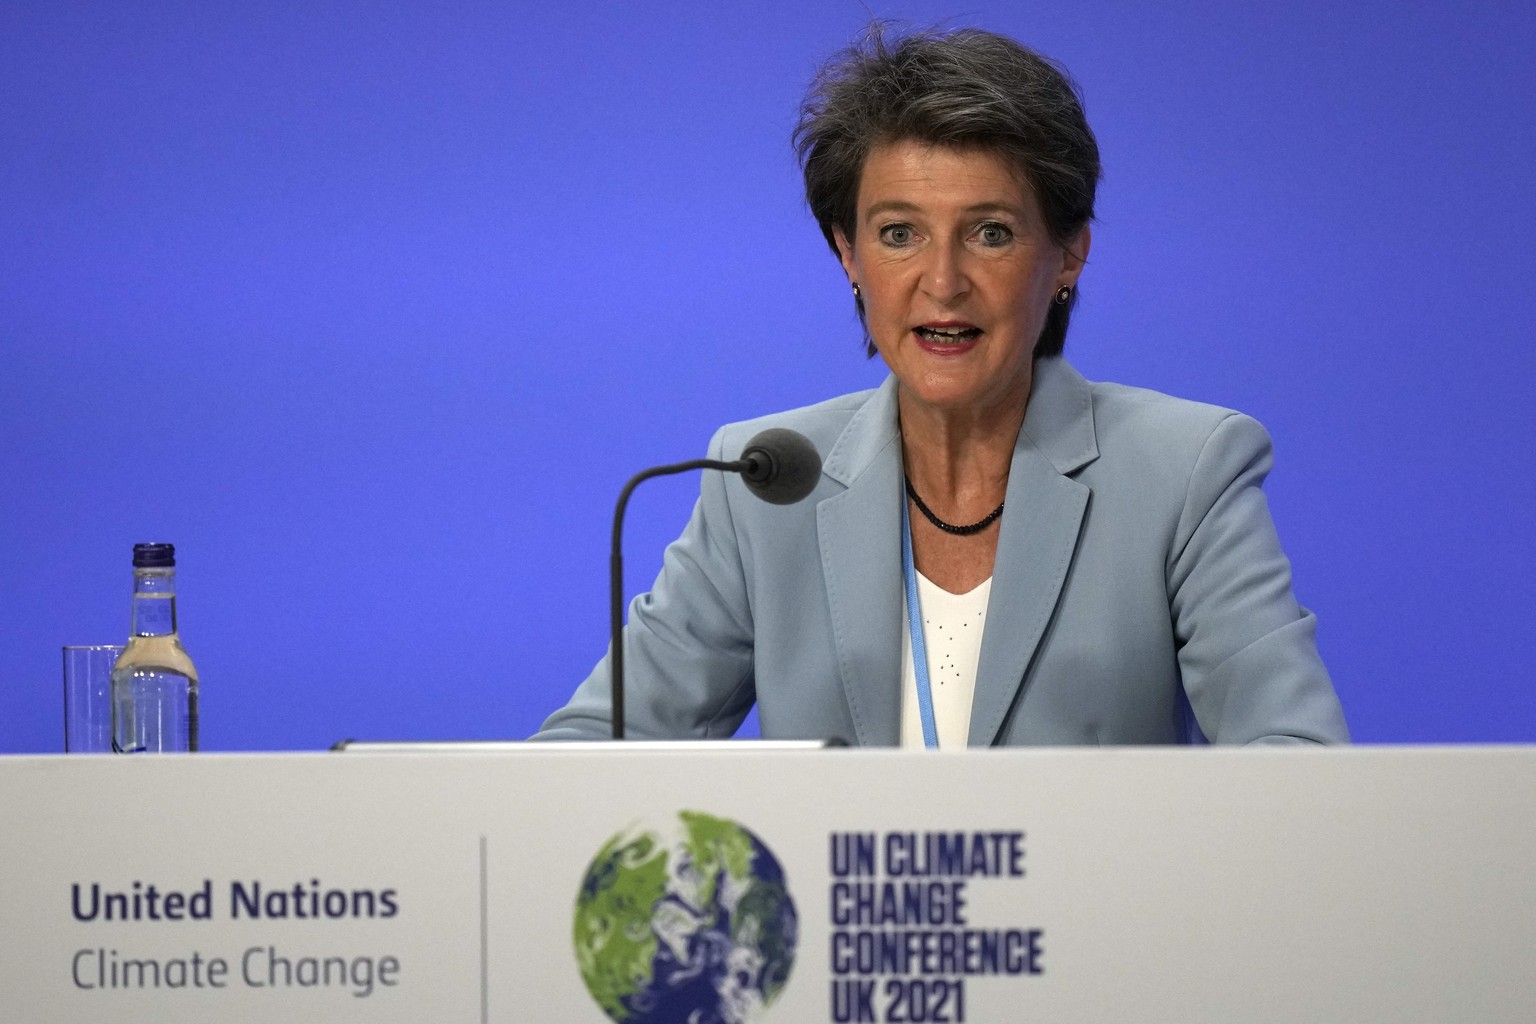 Simonetta Sommaruga, a member of the Swiss Federal Council speaks at the COP26 U.N. Climate Summit in Glasgow, Scotland, Thursday, Nov. 11, 2021. (AP Photo/Alastair Grant)